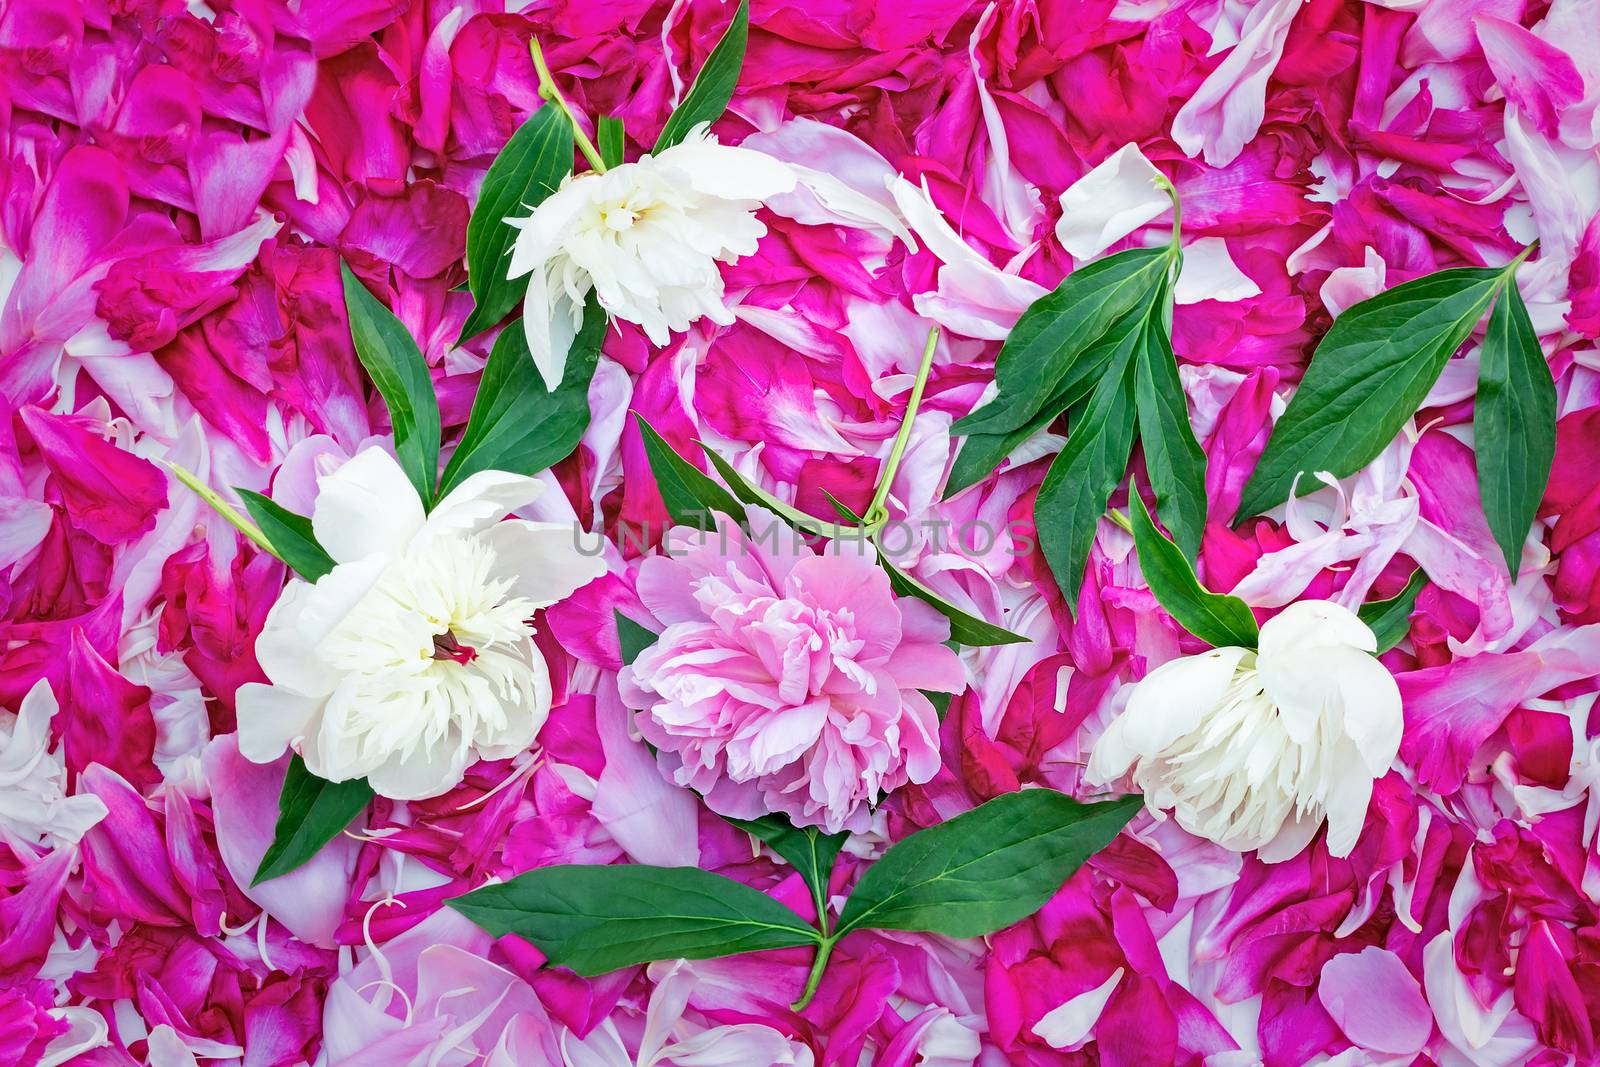 Petals of peonies in a large number, flowers and leaves of peoni by georgina198